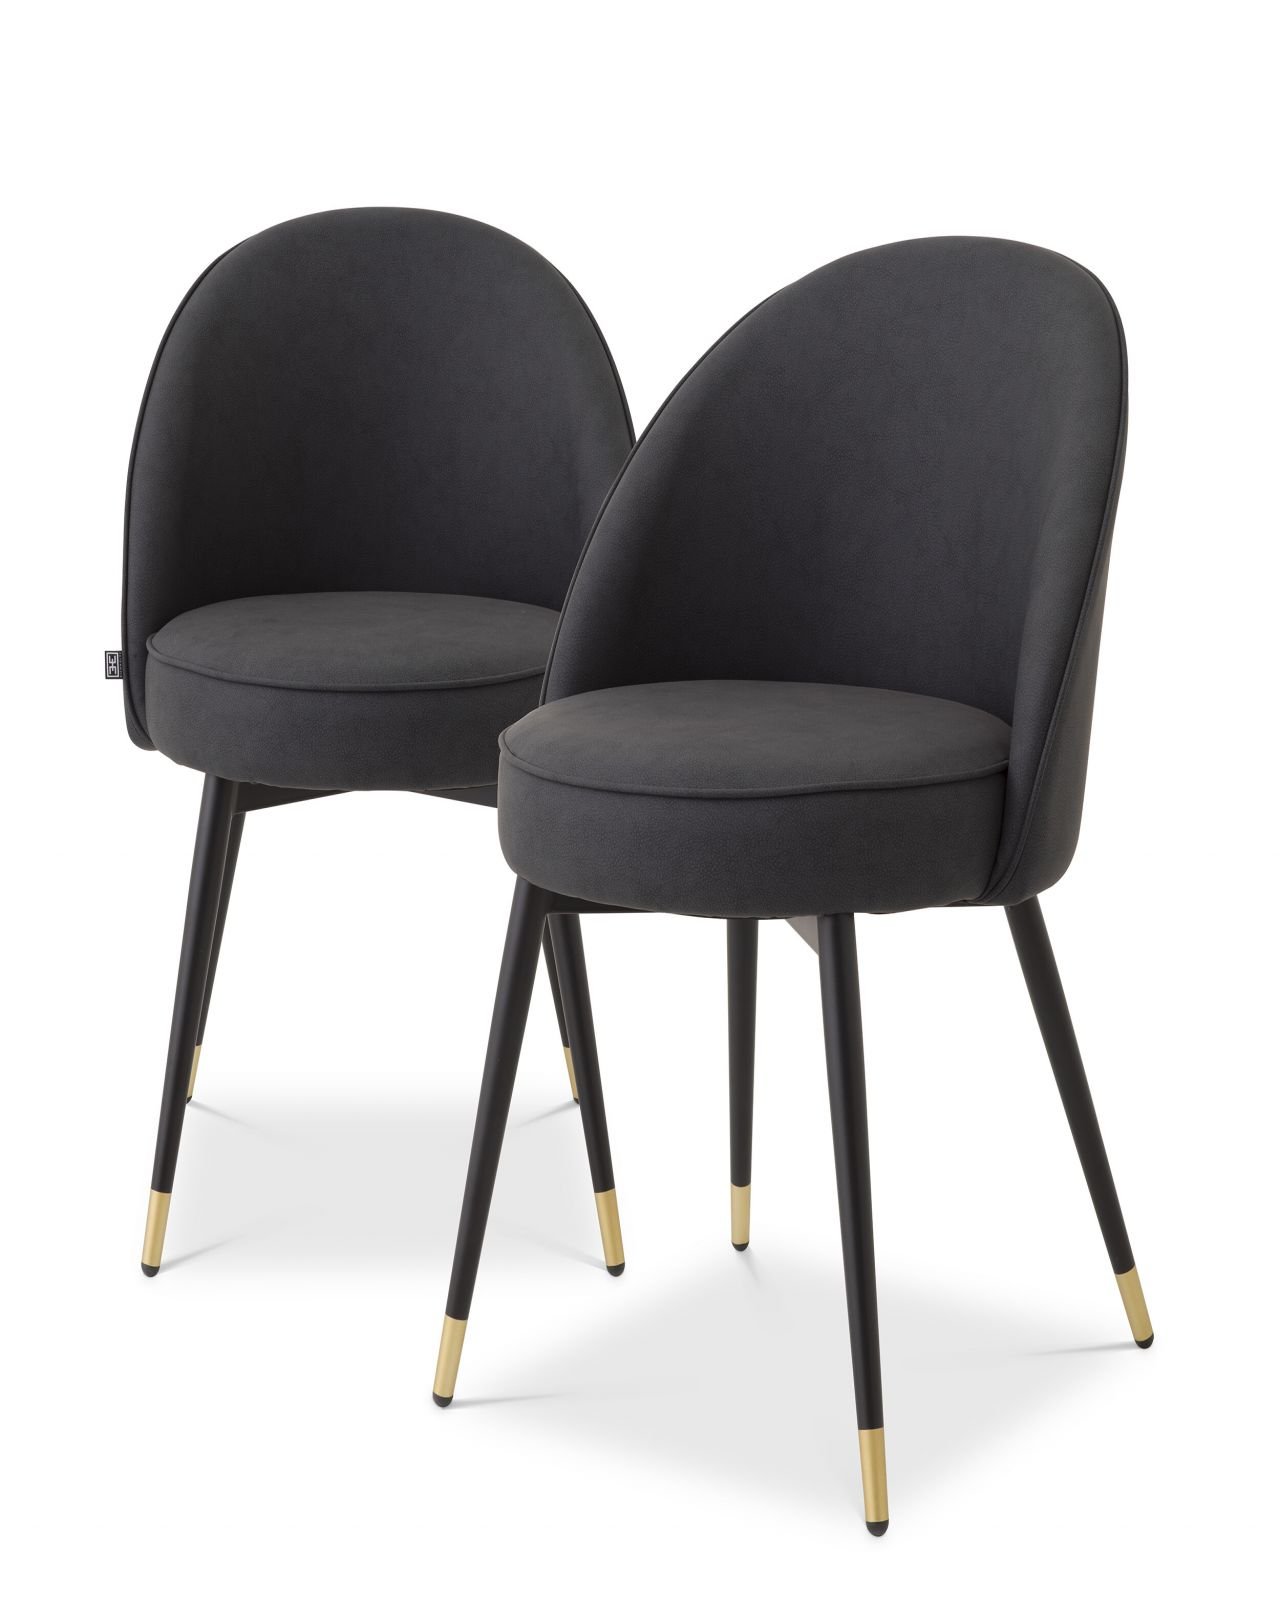 Cooper dining chair faux leather grey set of 2